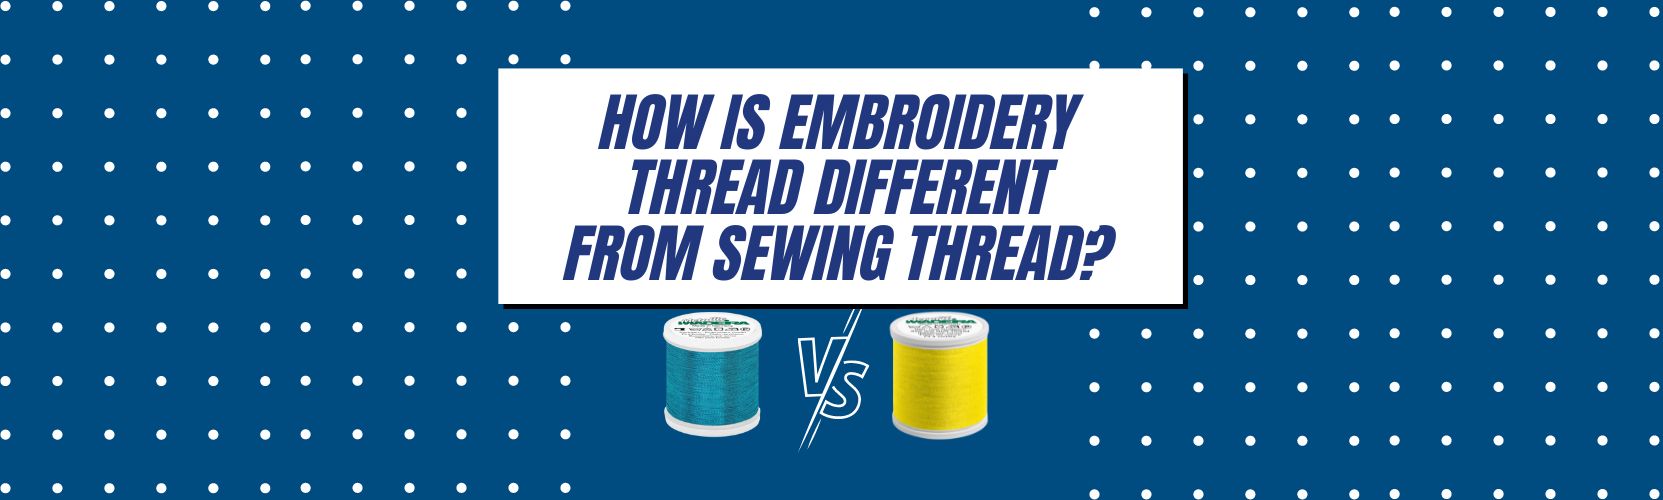 how is embroidery thread different from sewing thread